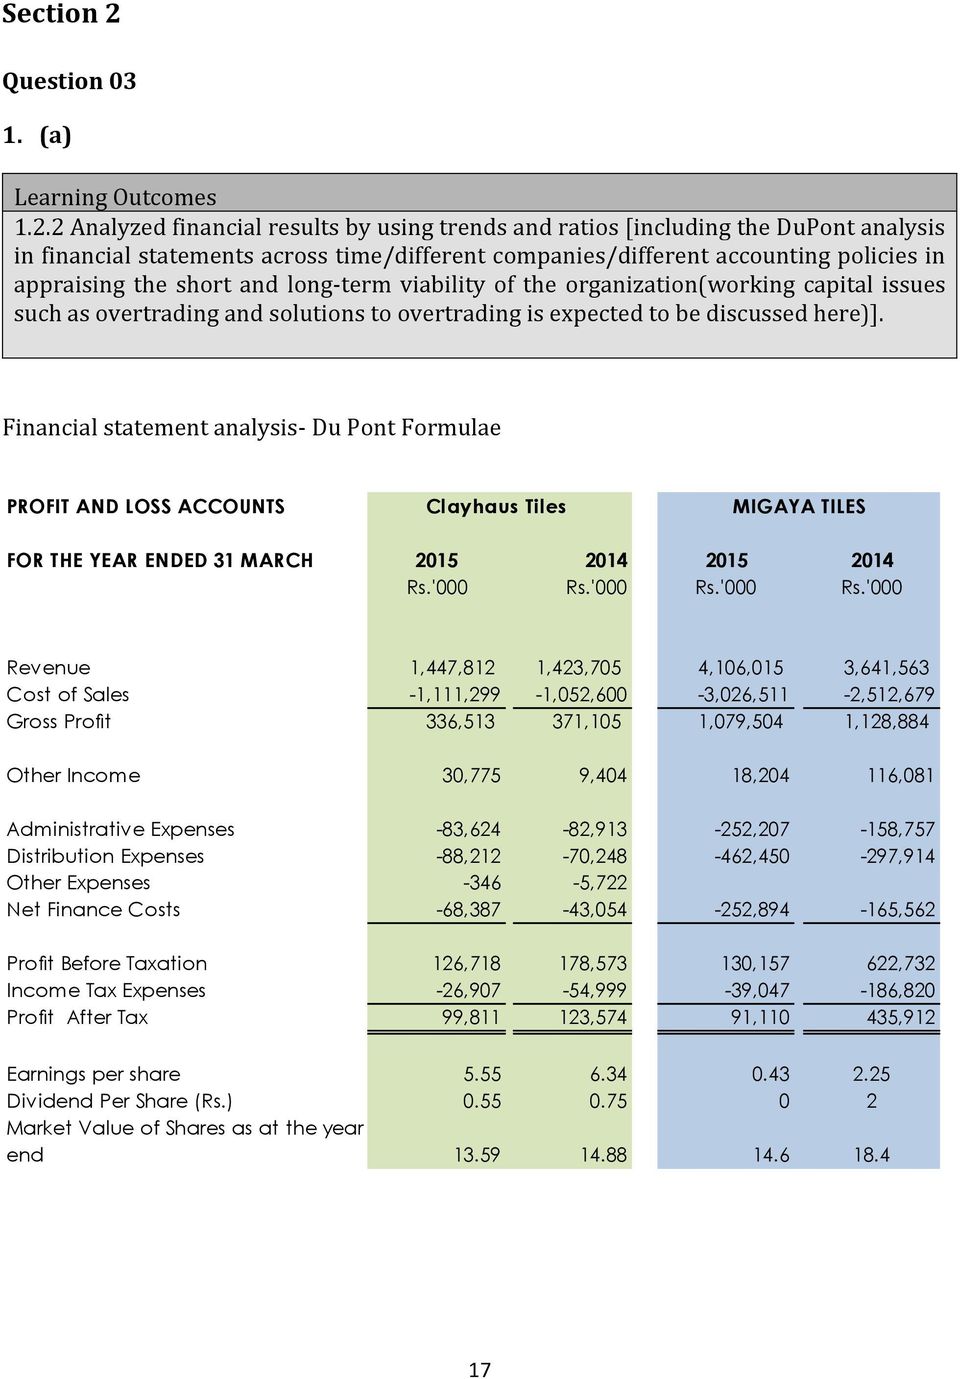 2 Analyzed financial results by using trends and ratios [including the DuPont analysis in financial statements across time/different companies/different accounting policies in appraising the short